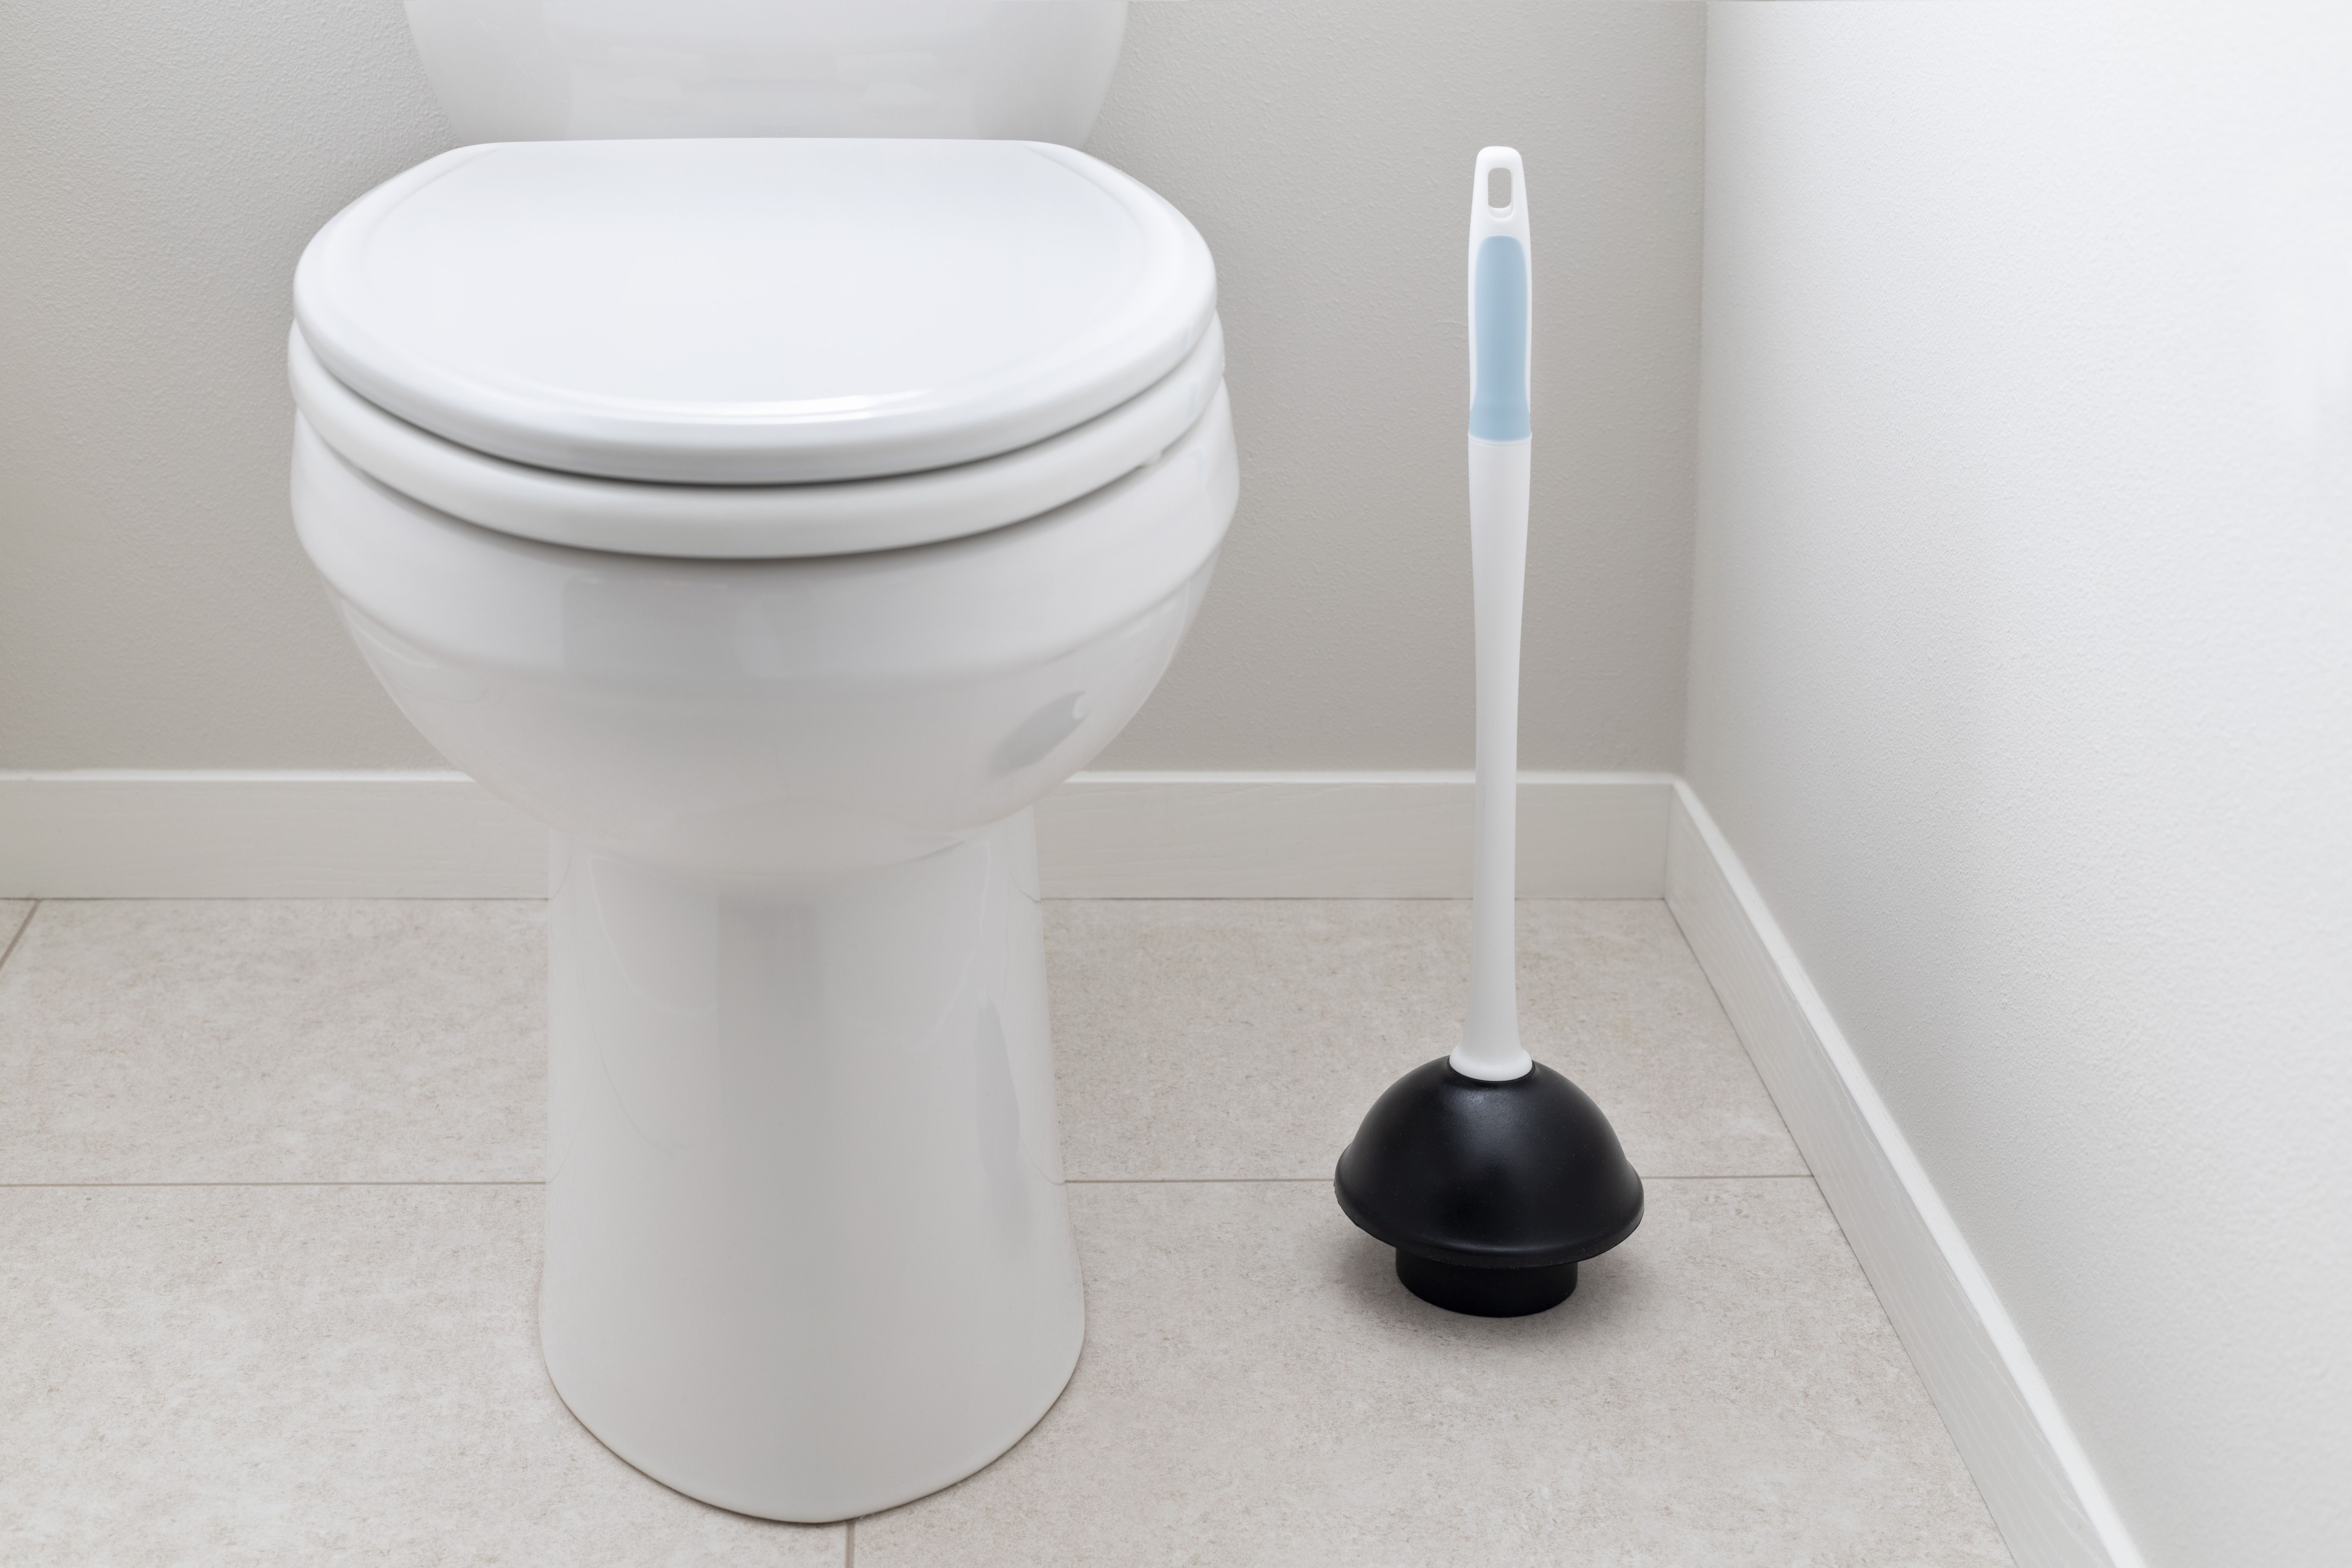 How to Unclog a Toilet With a Plunger (the Easy Way)